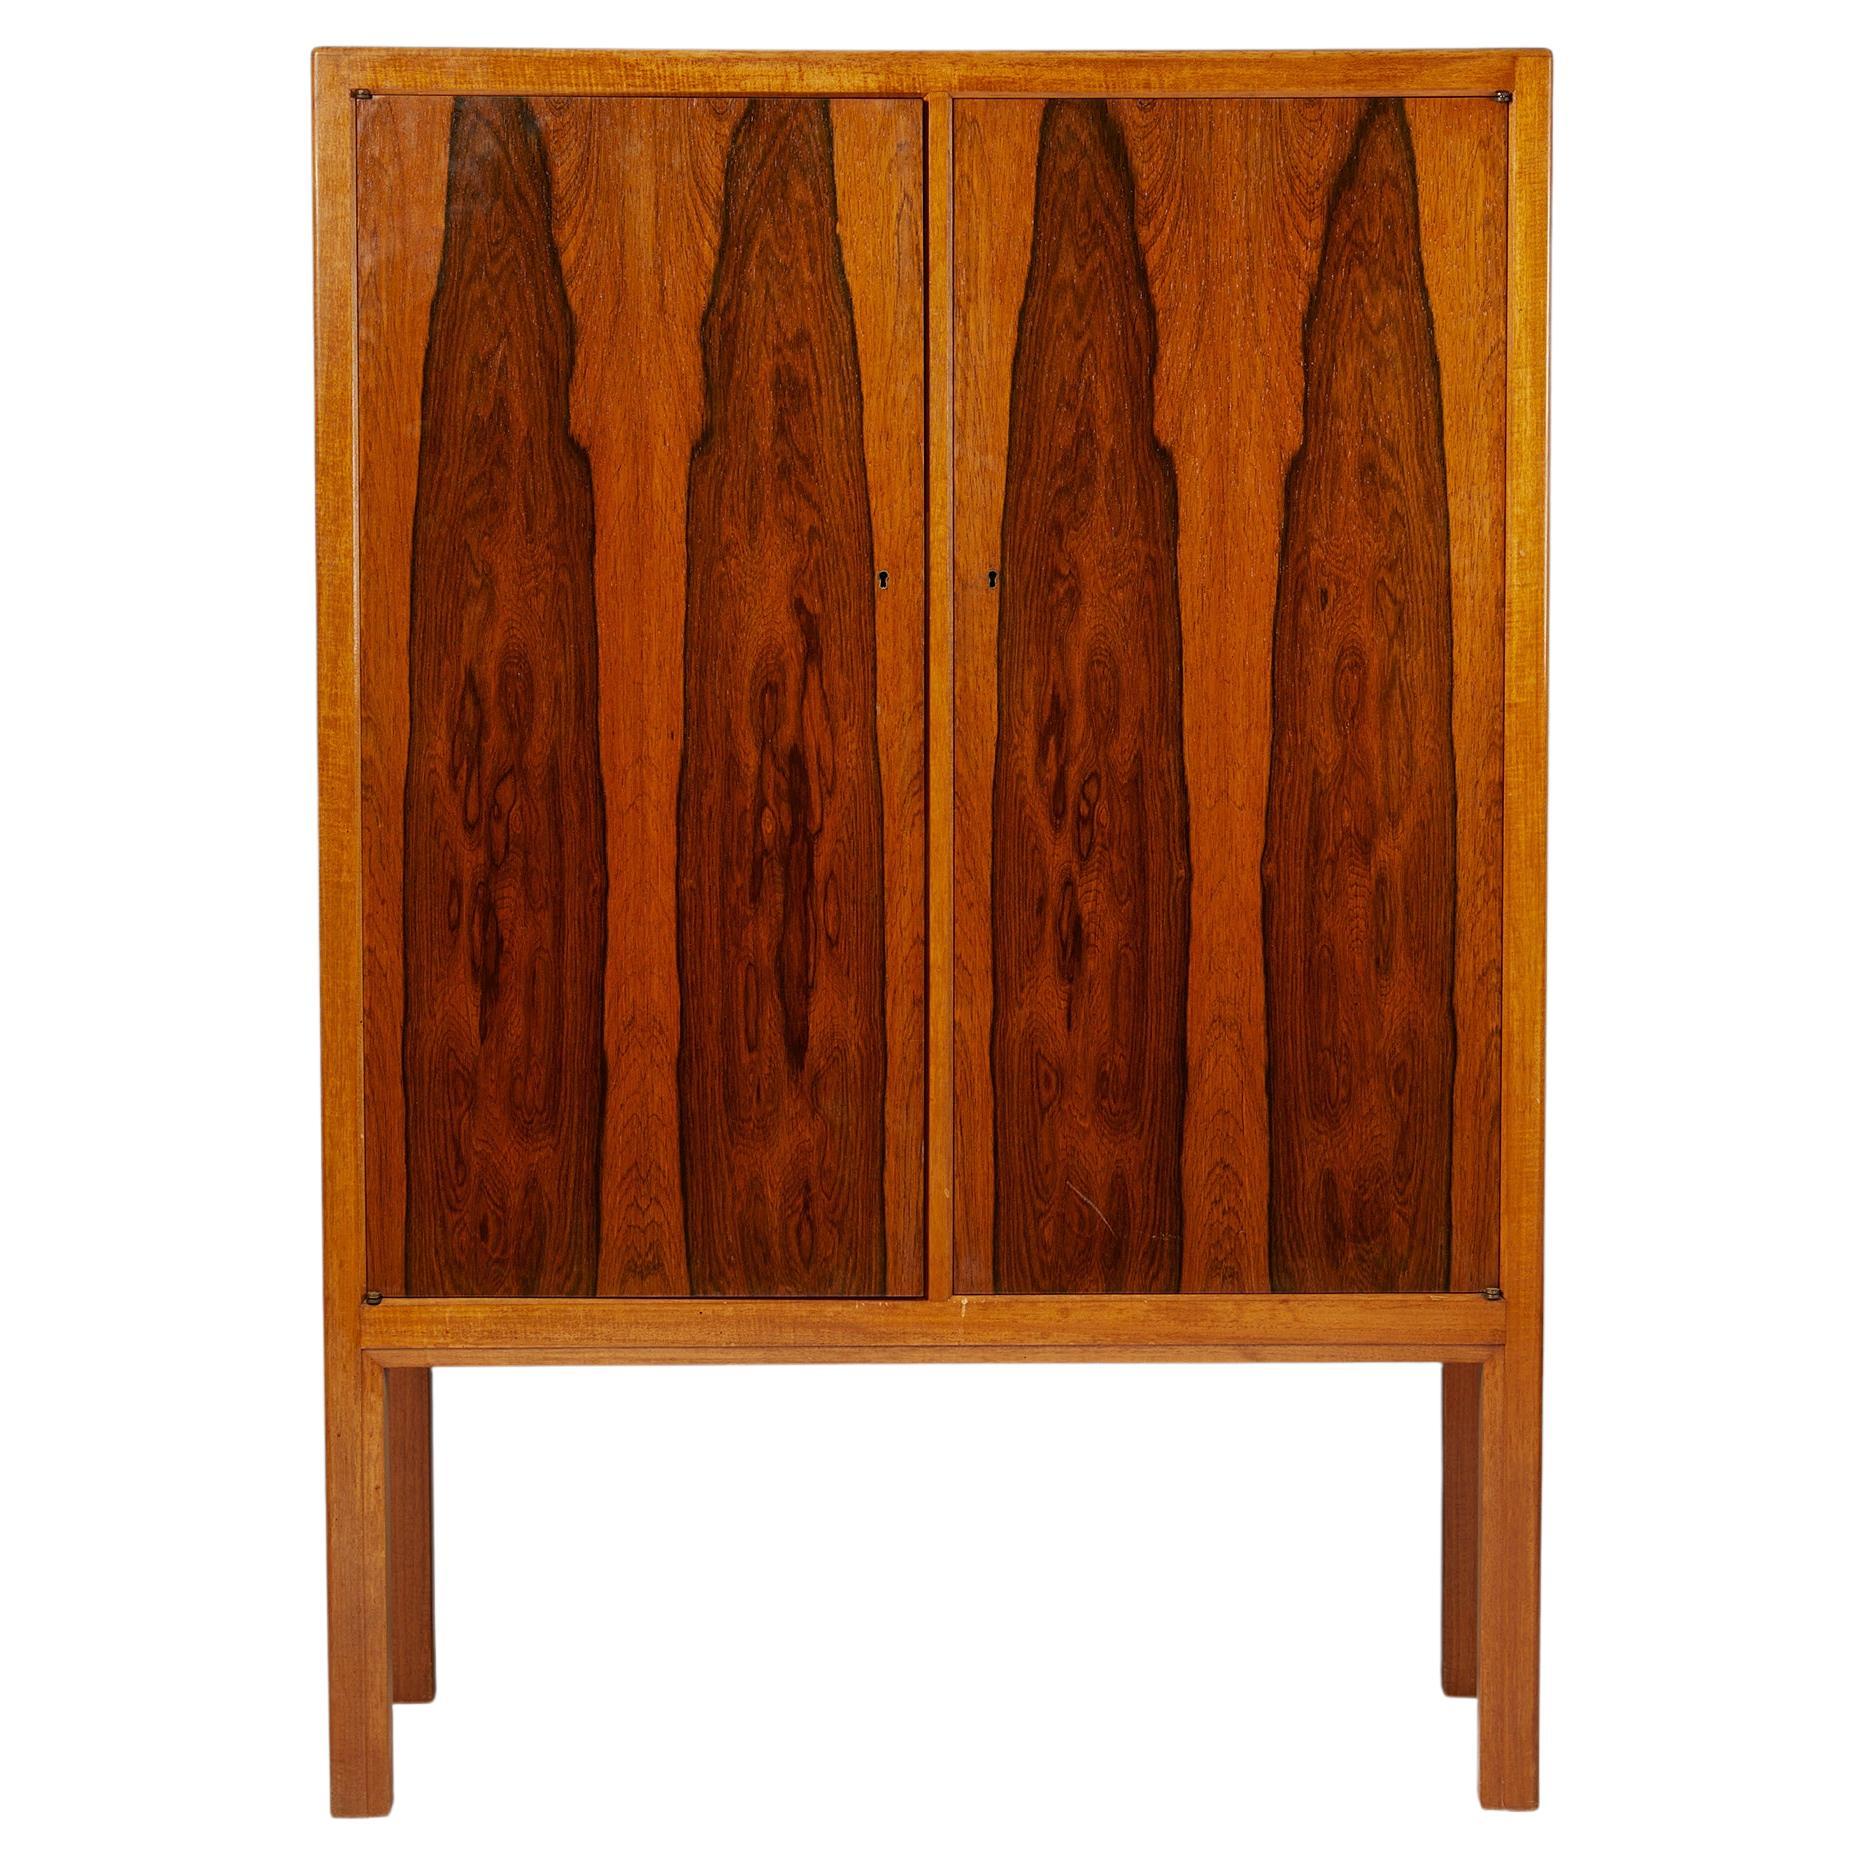 Cabinet, anonymous,
Sweden, 1950s.

Brazilian rosewood and mahogany.

Dimensions:
H: 136 cm / 4' 5 1/2